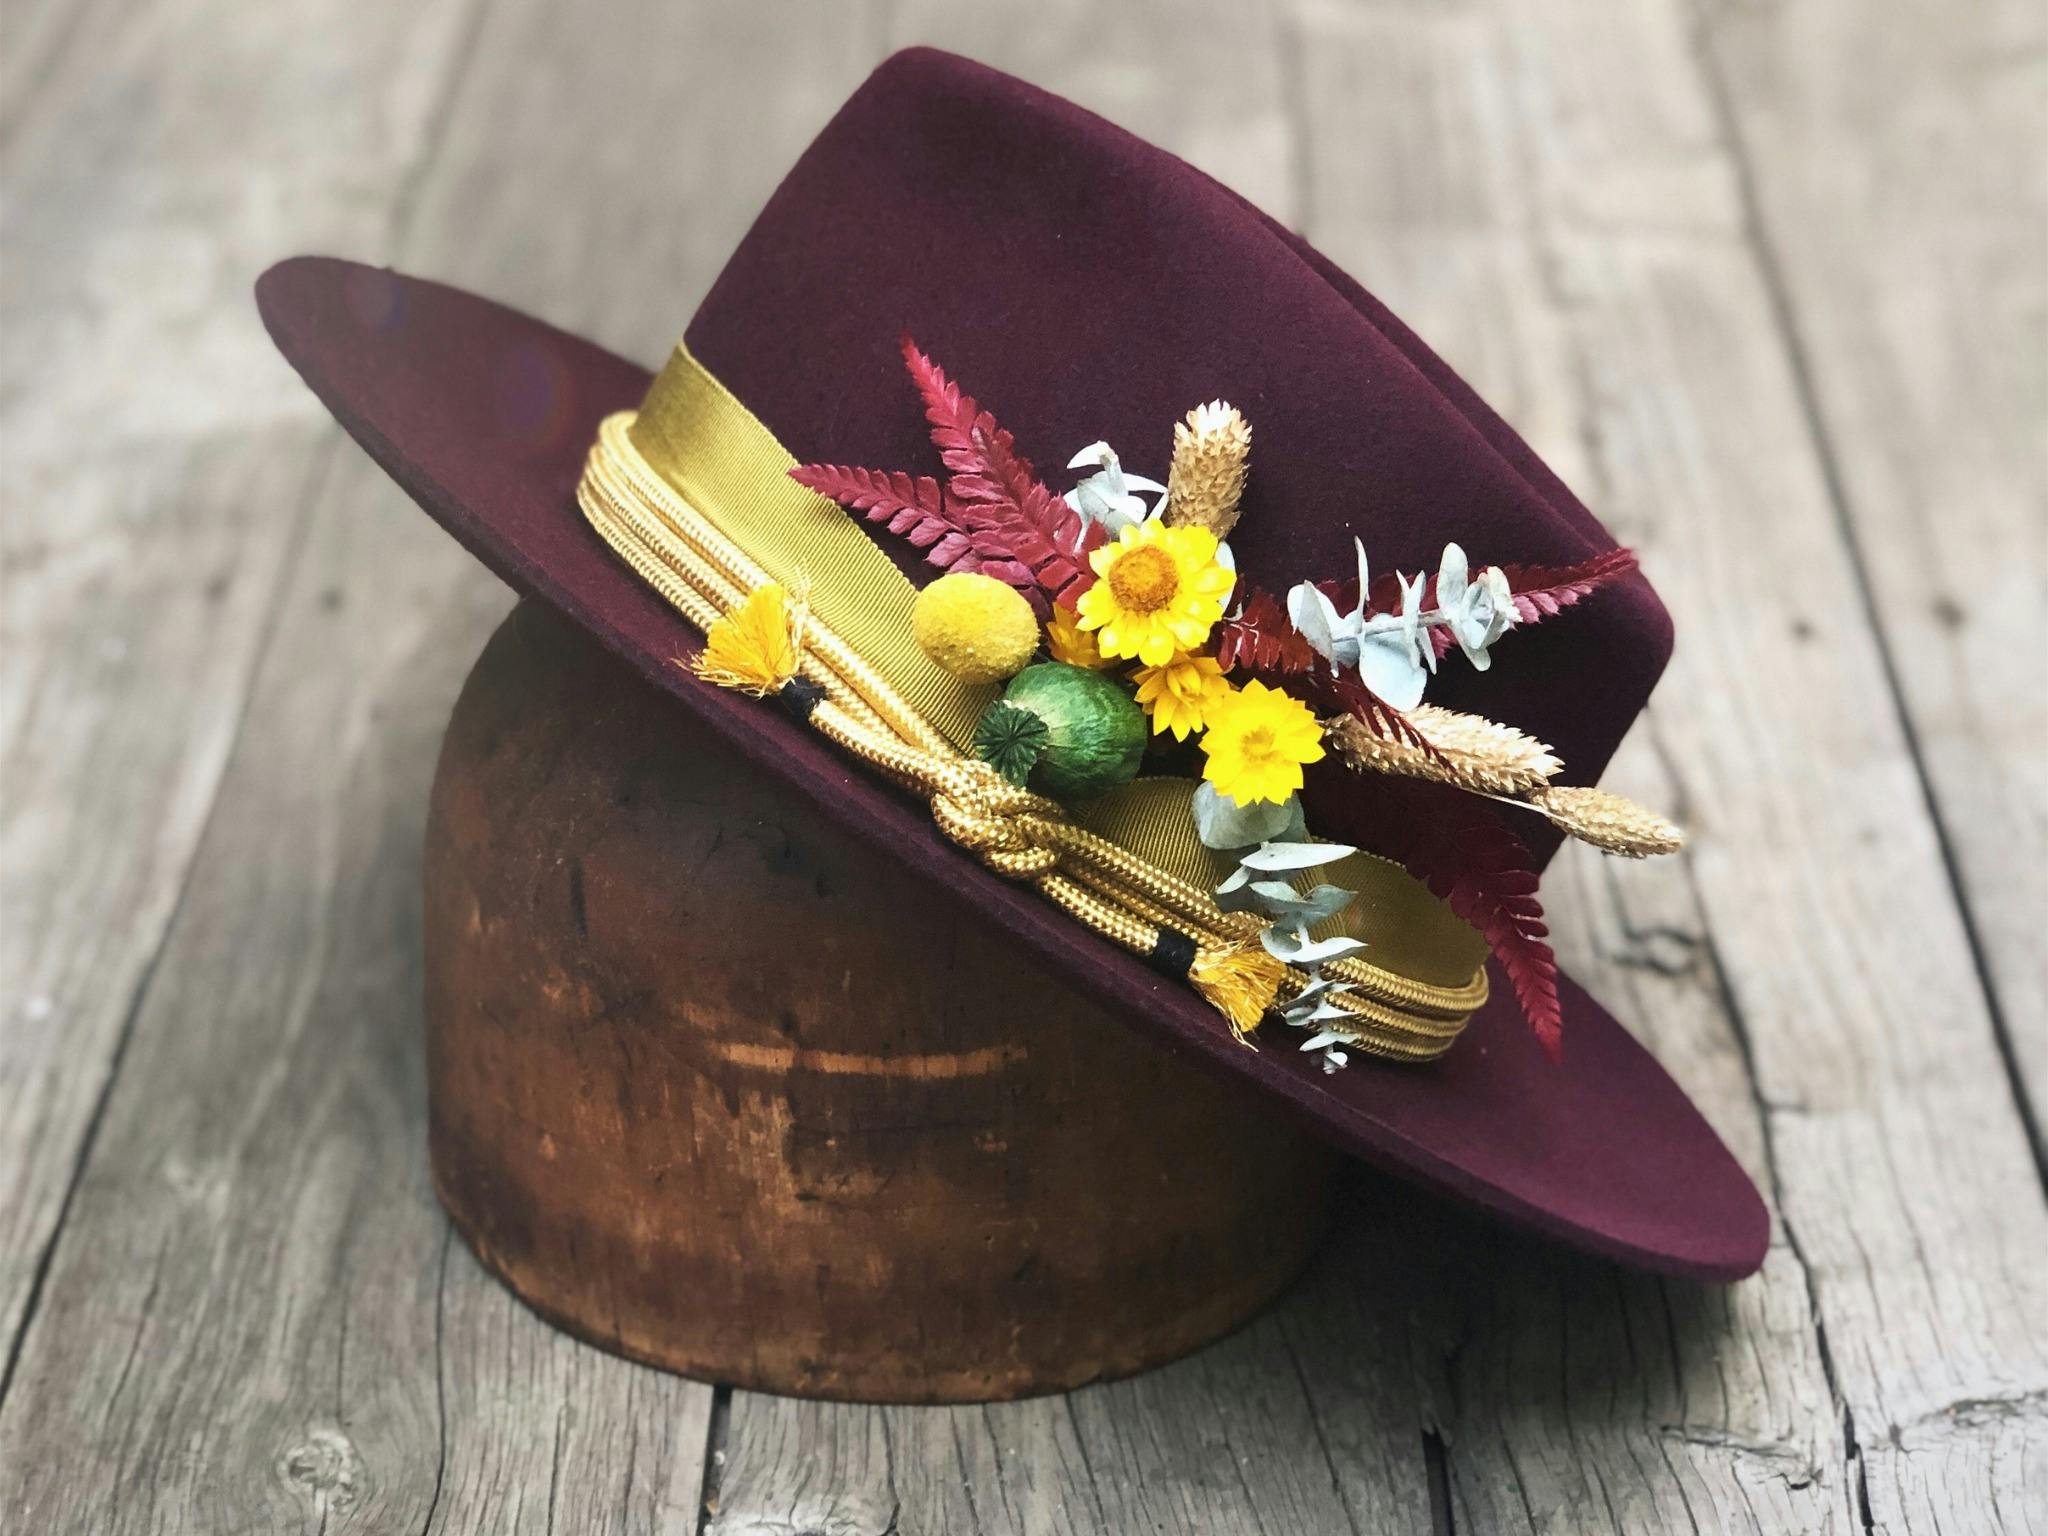 Brimmed hat with floral and ribbons design